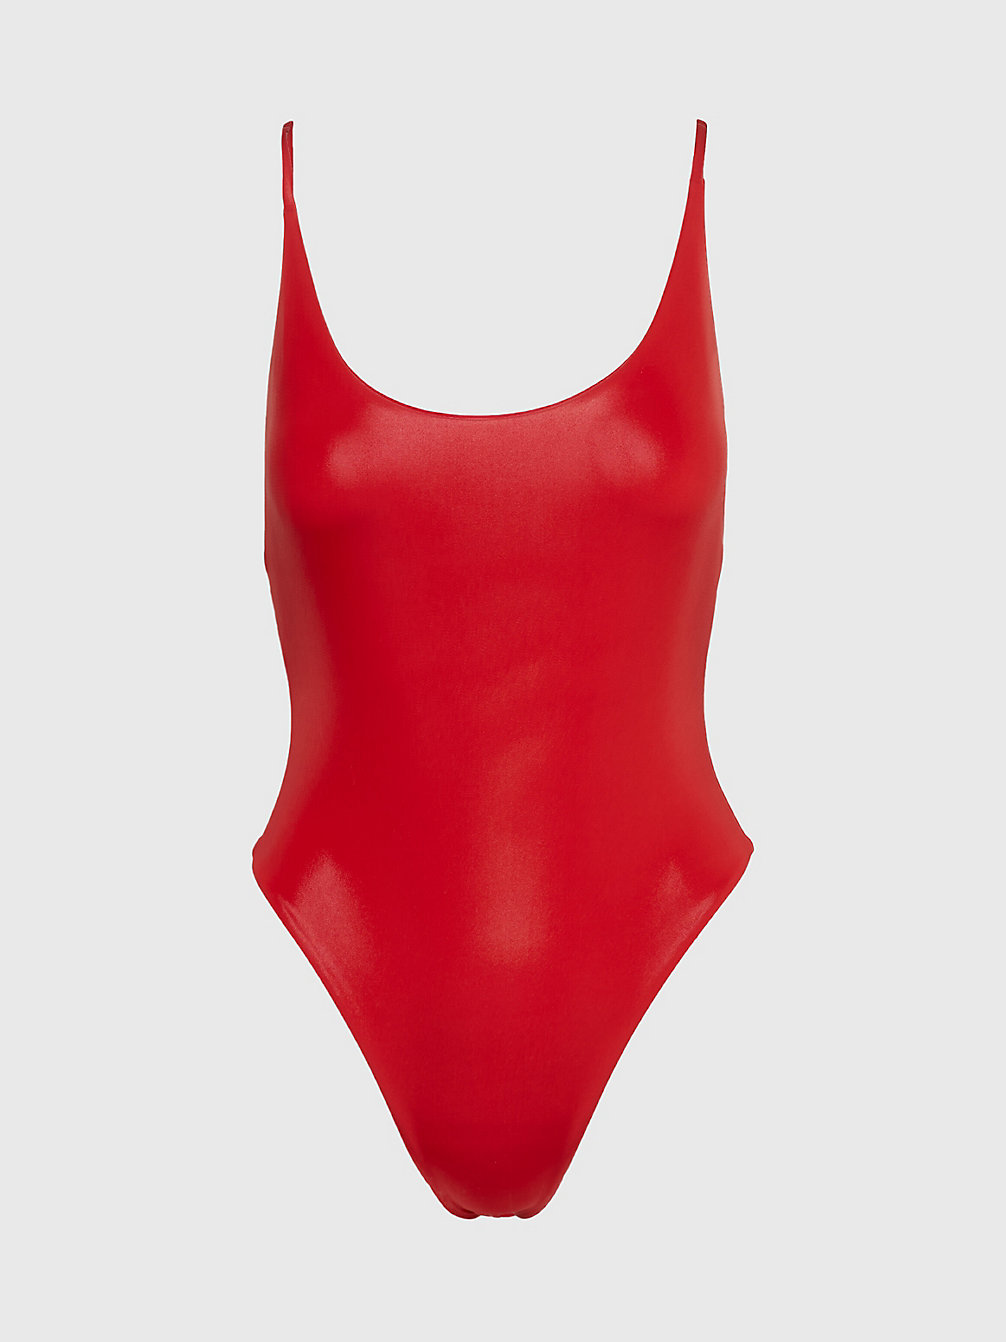 ORCHARD RED Maillot De Bain Dos Nageur - Neo Archive undefined Femmes Calvin Klein